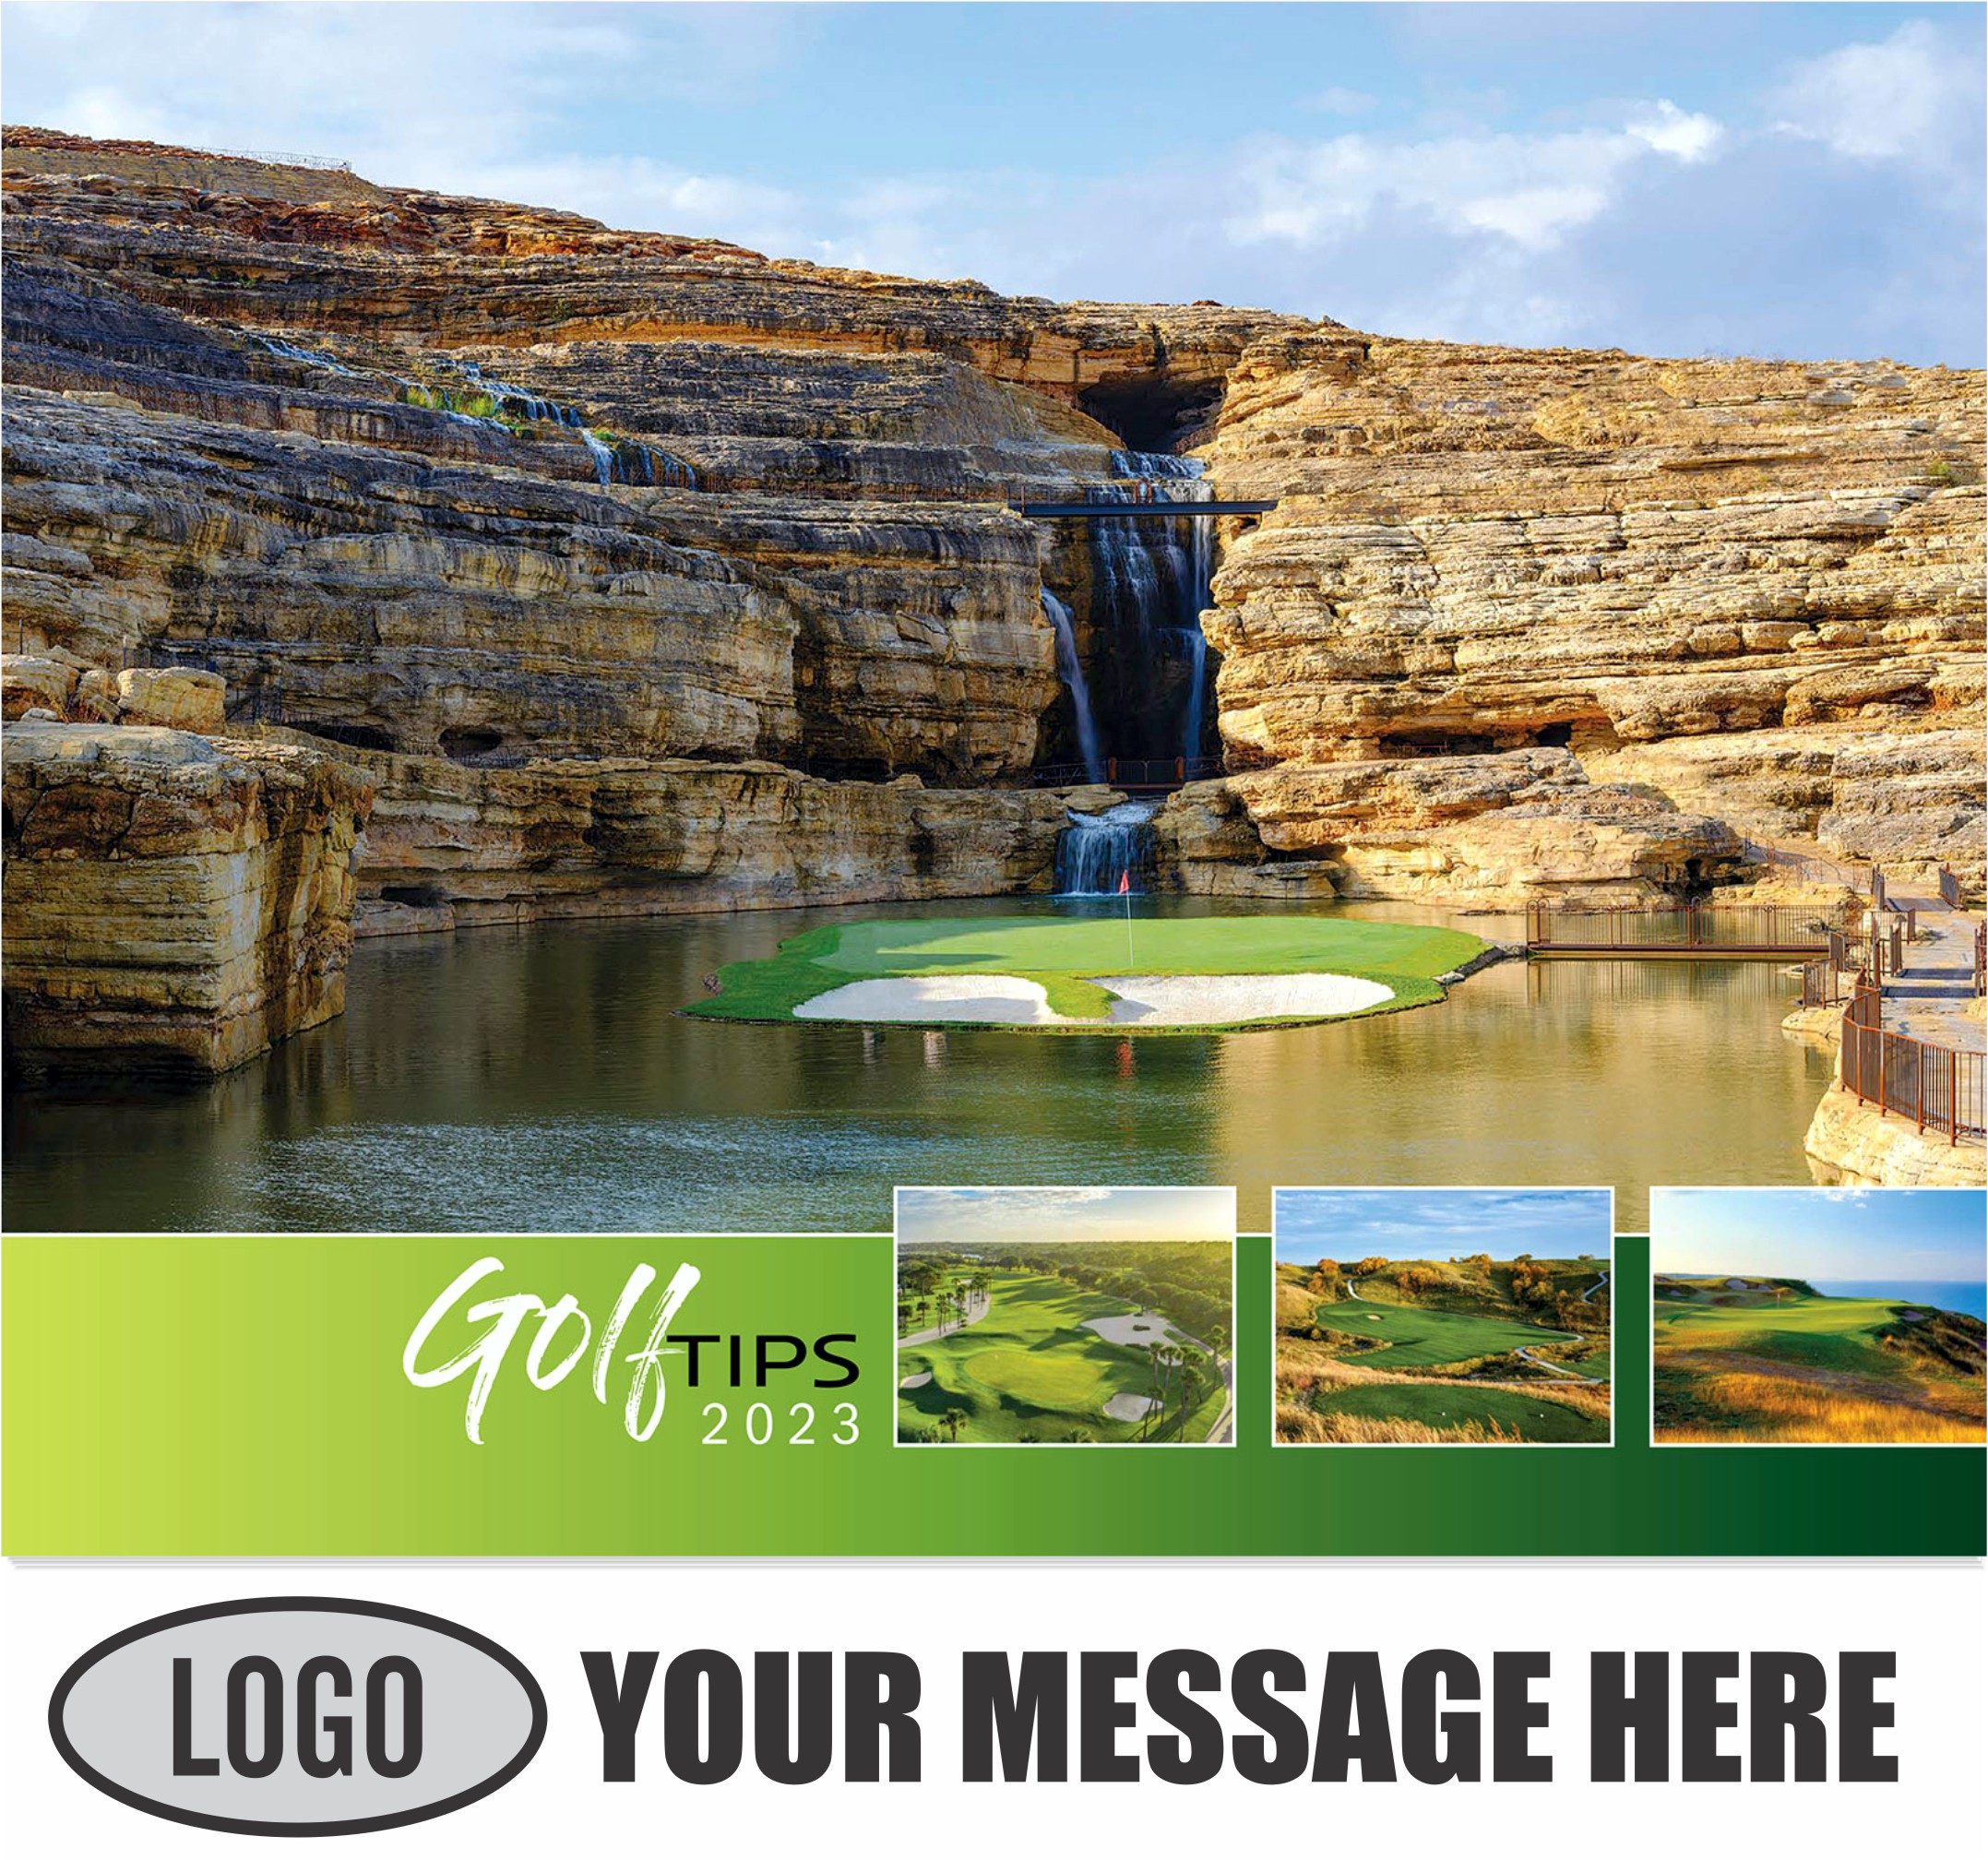 2023 Golf Tips  (Tips, Quips and Holes) Promotional Calendar